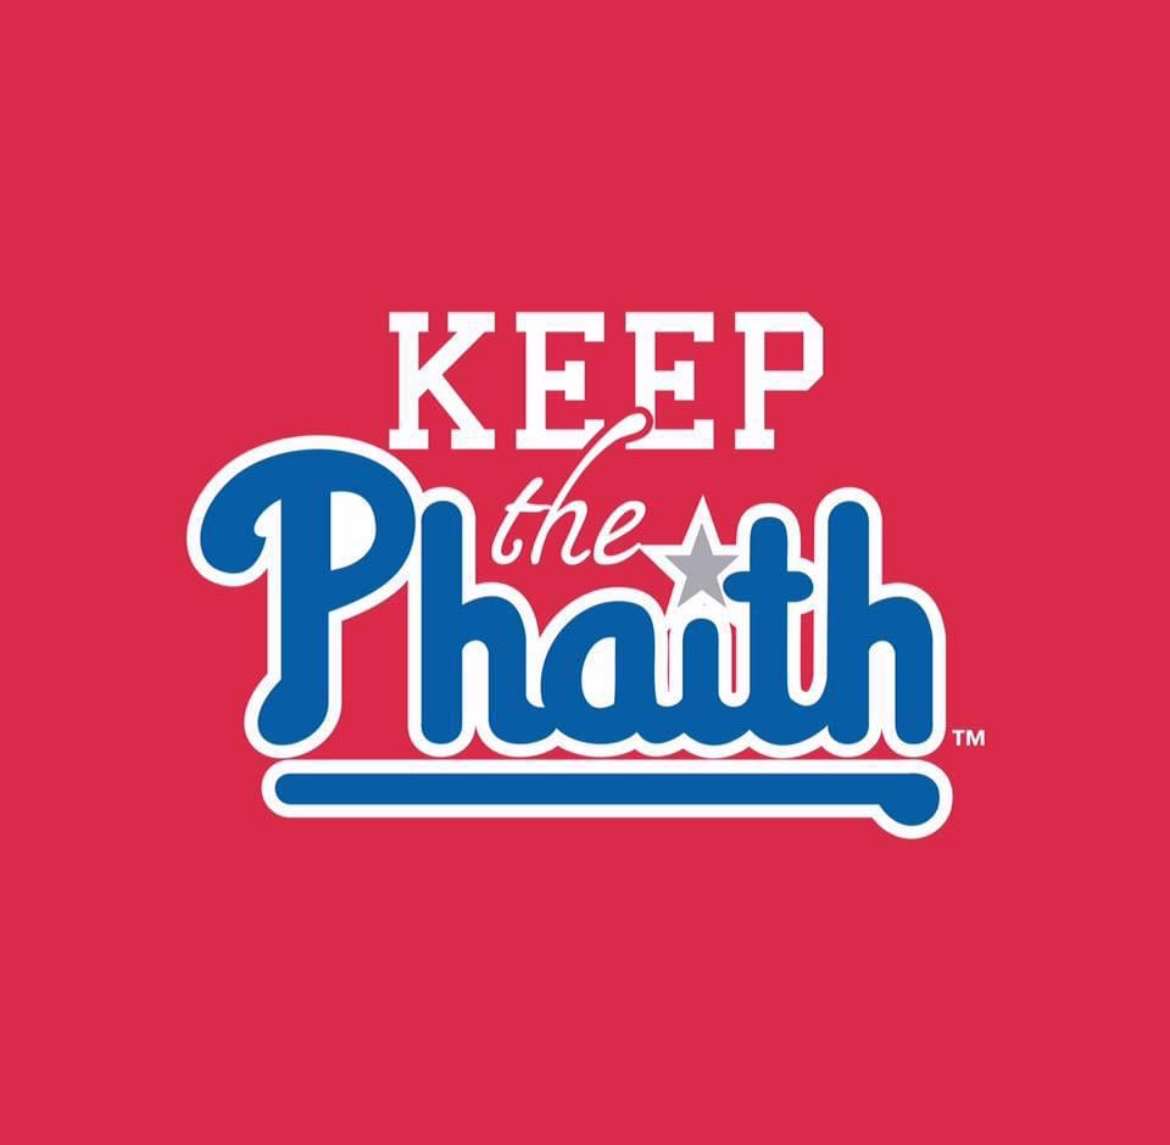 Keep+the+Phaith+supports+grieving+families+by+partnering+with+the+Phillies